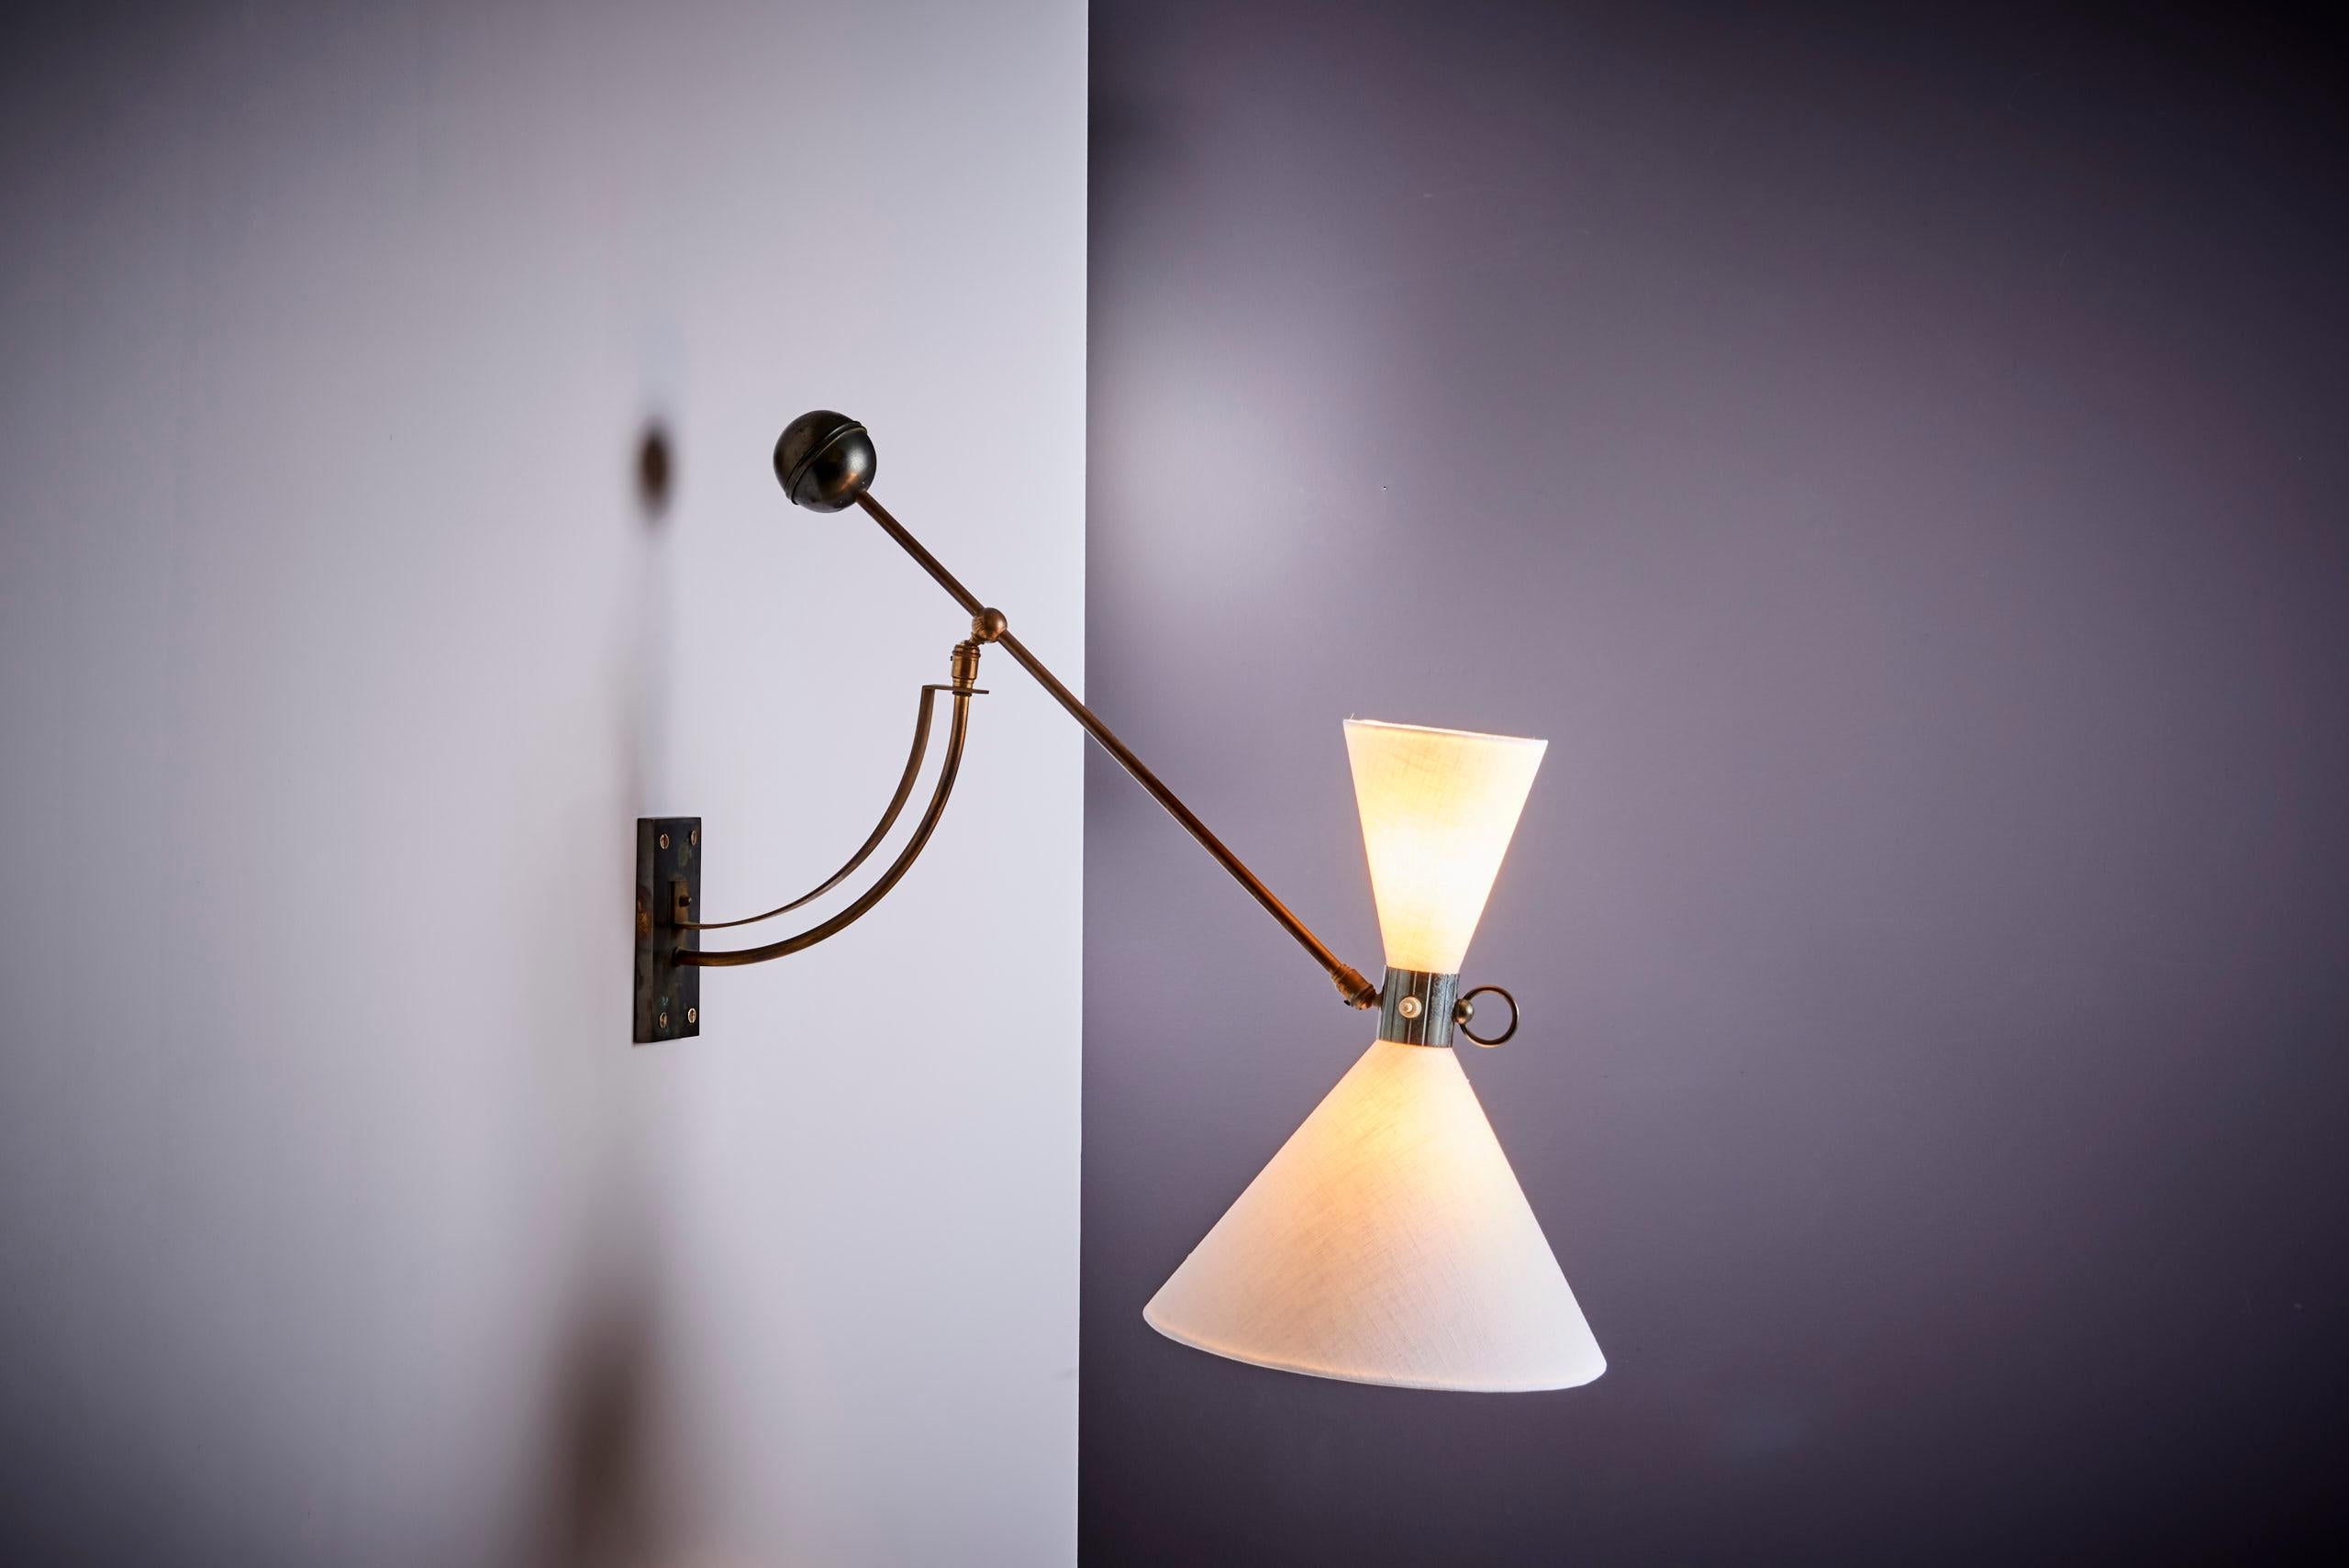 Counterweight Wall Lamp with adjustable height, 1950s - France In Good Condition For Sale In Berlin, DE